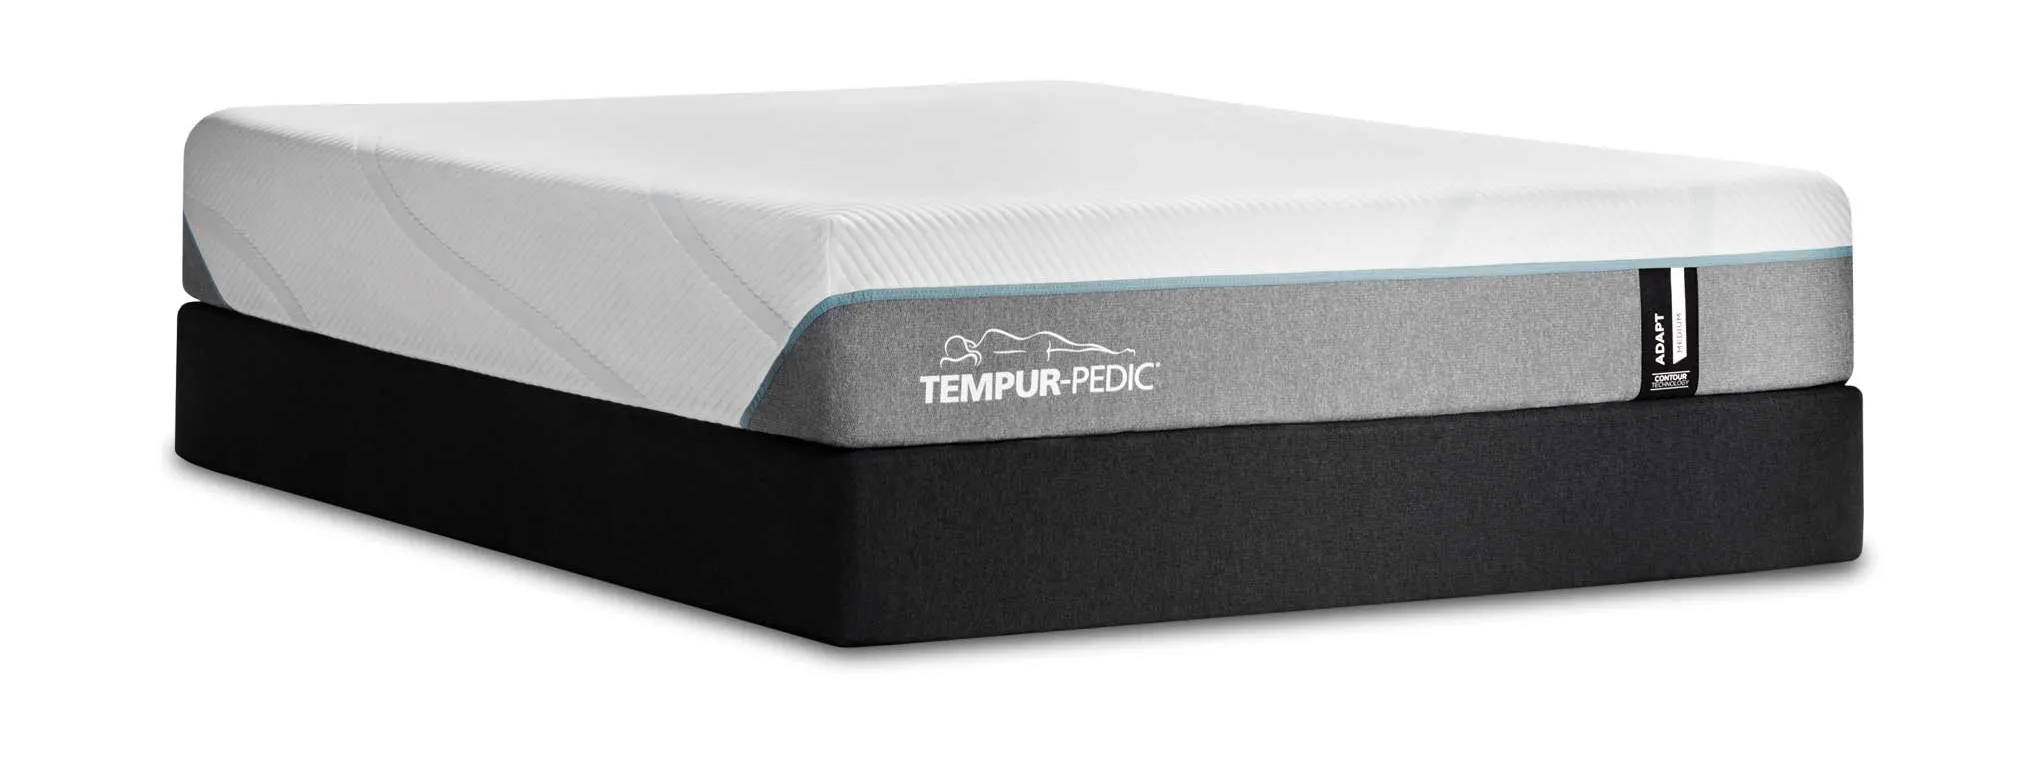 What You Need To Know About Tempur-Pedic 